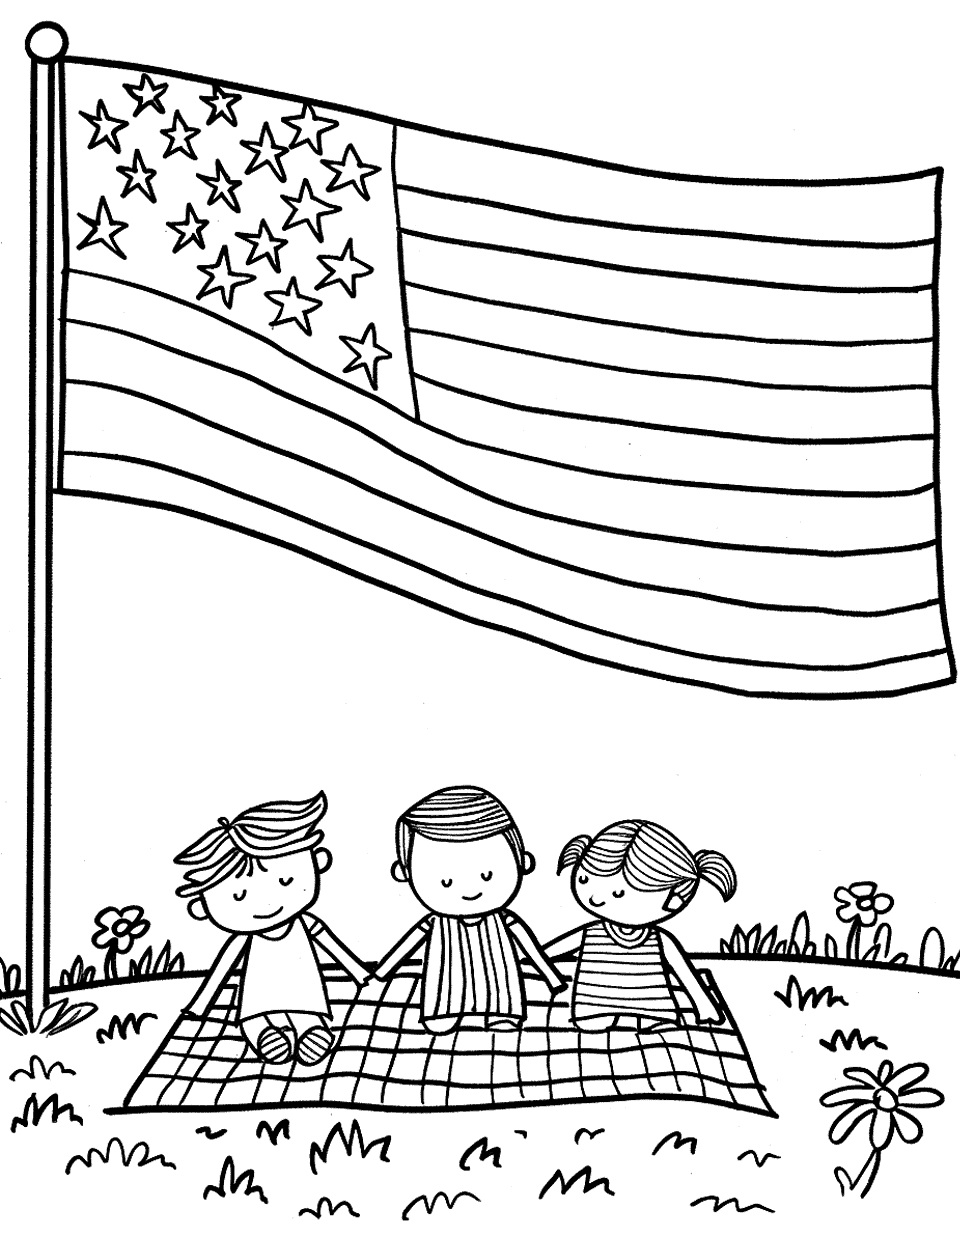 Fourth of July Picnic American Flag Coloring Page - A family picnic scene with a huge American flags behind them.